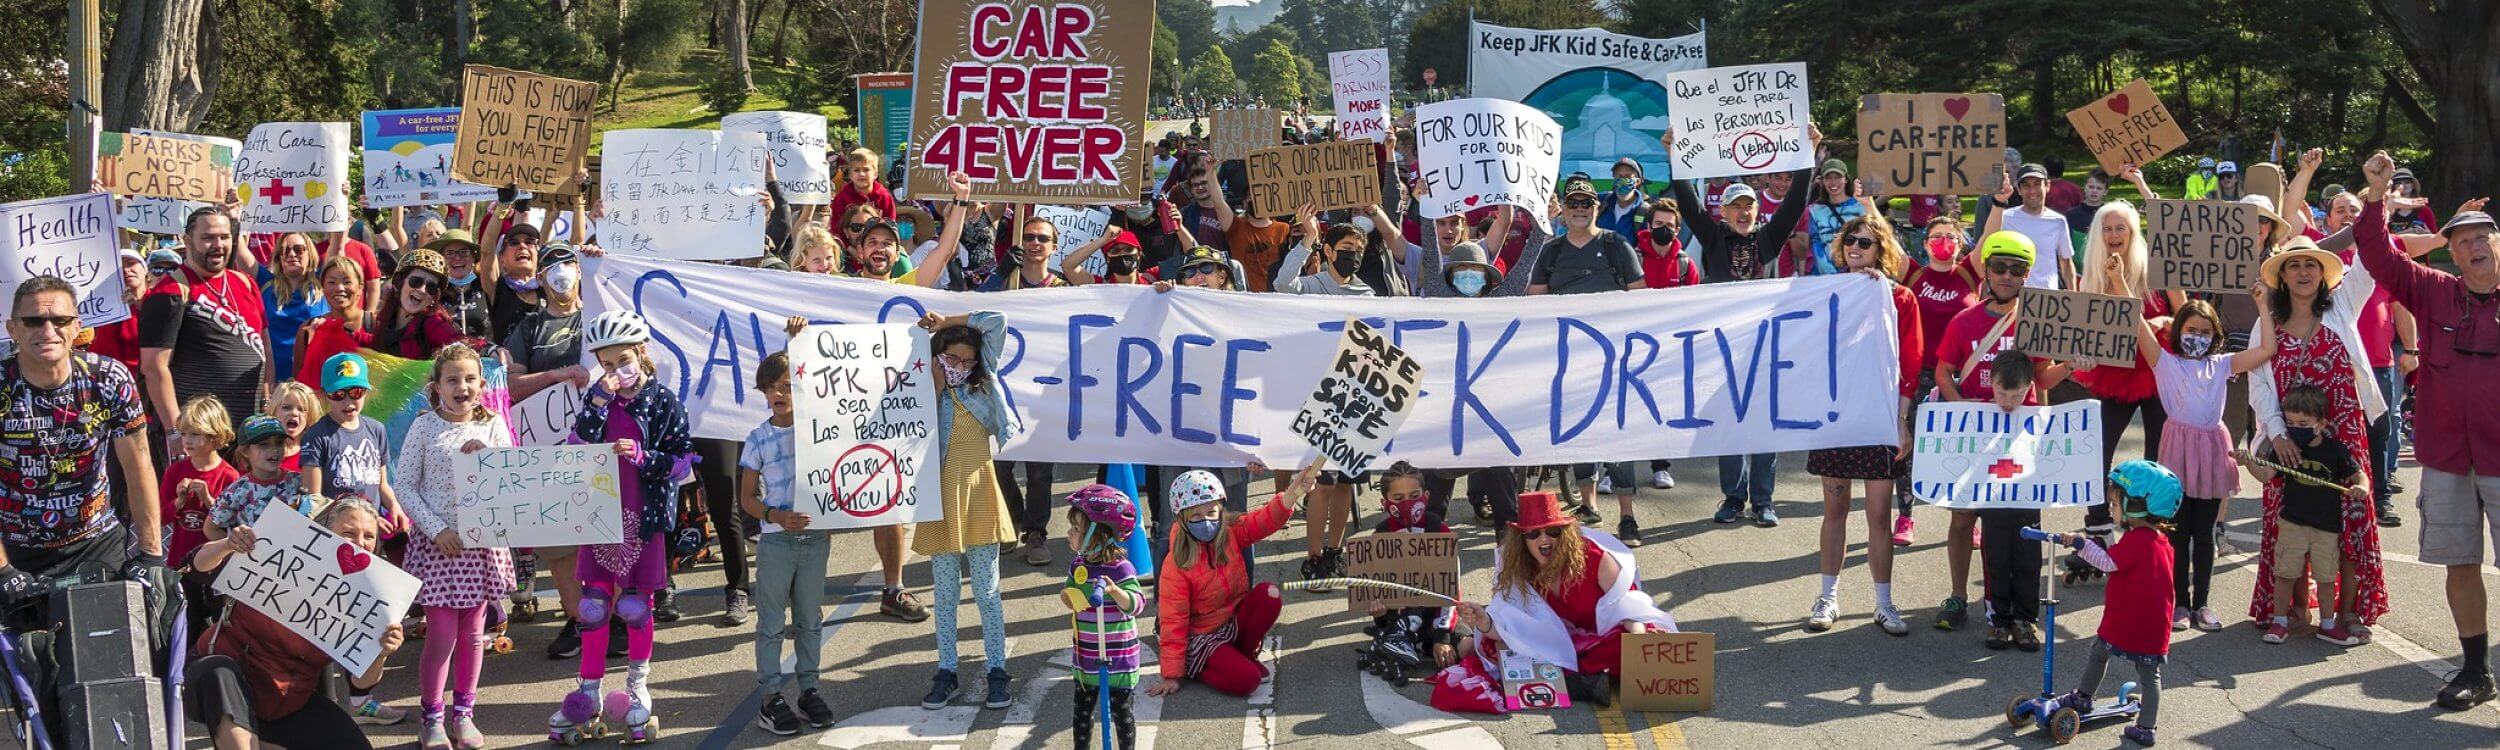 Support for the Car-Free JFK Drive Campaign